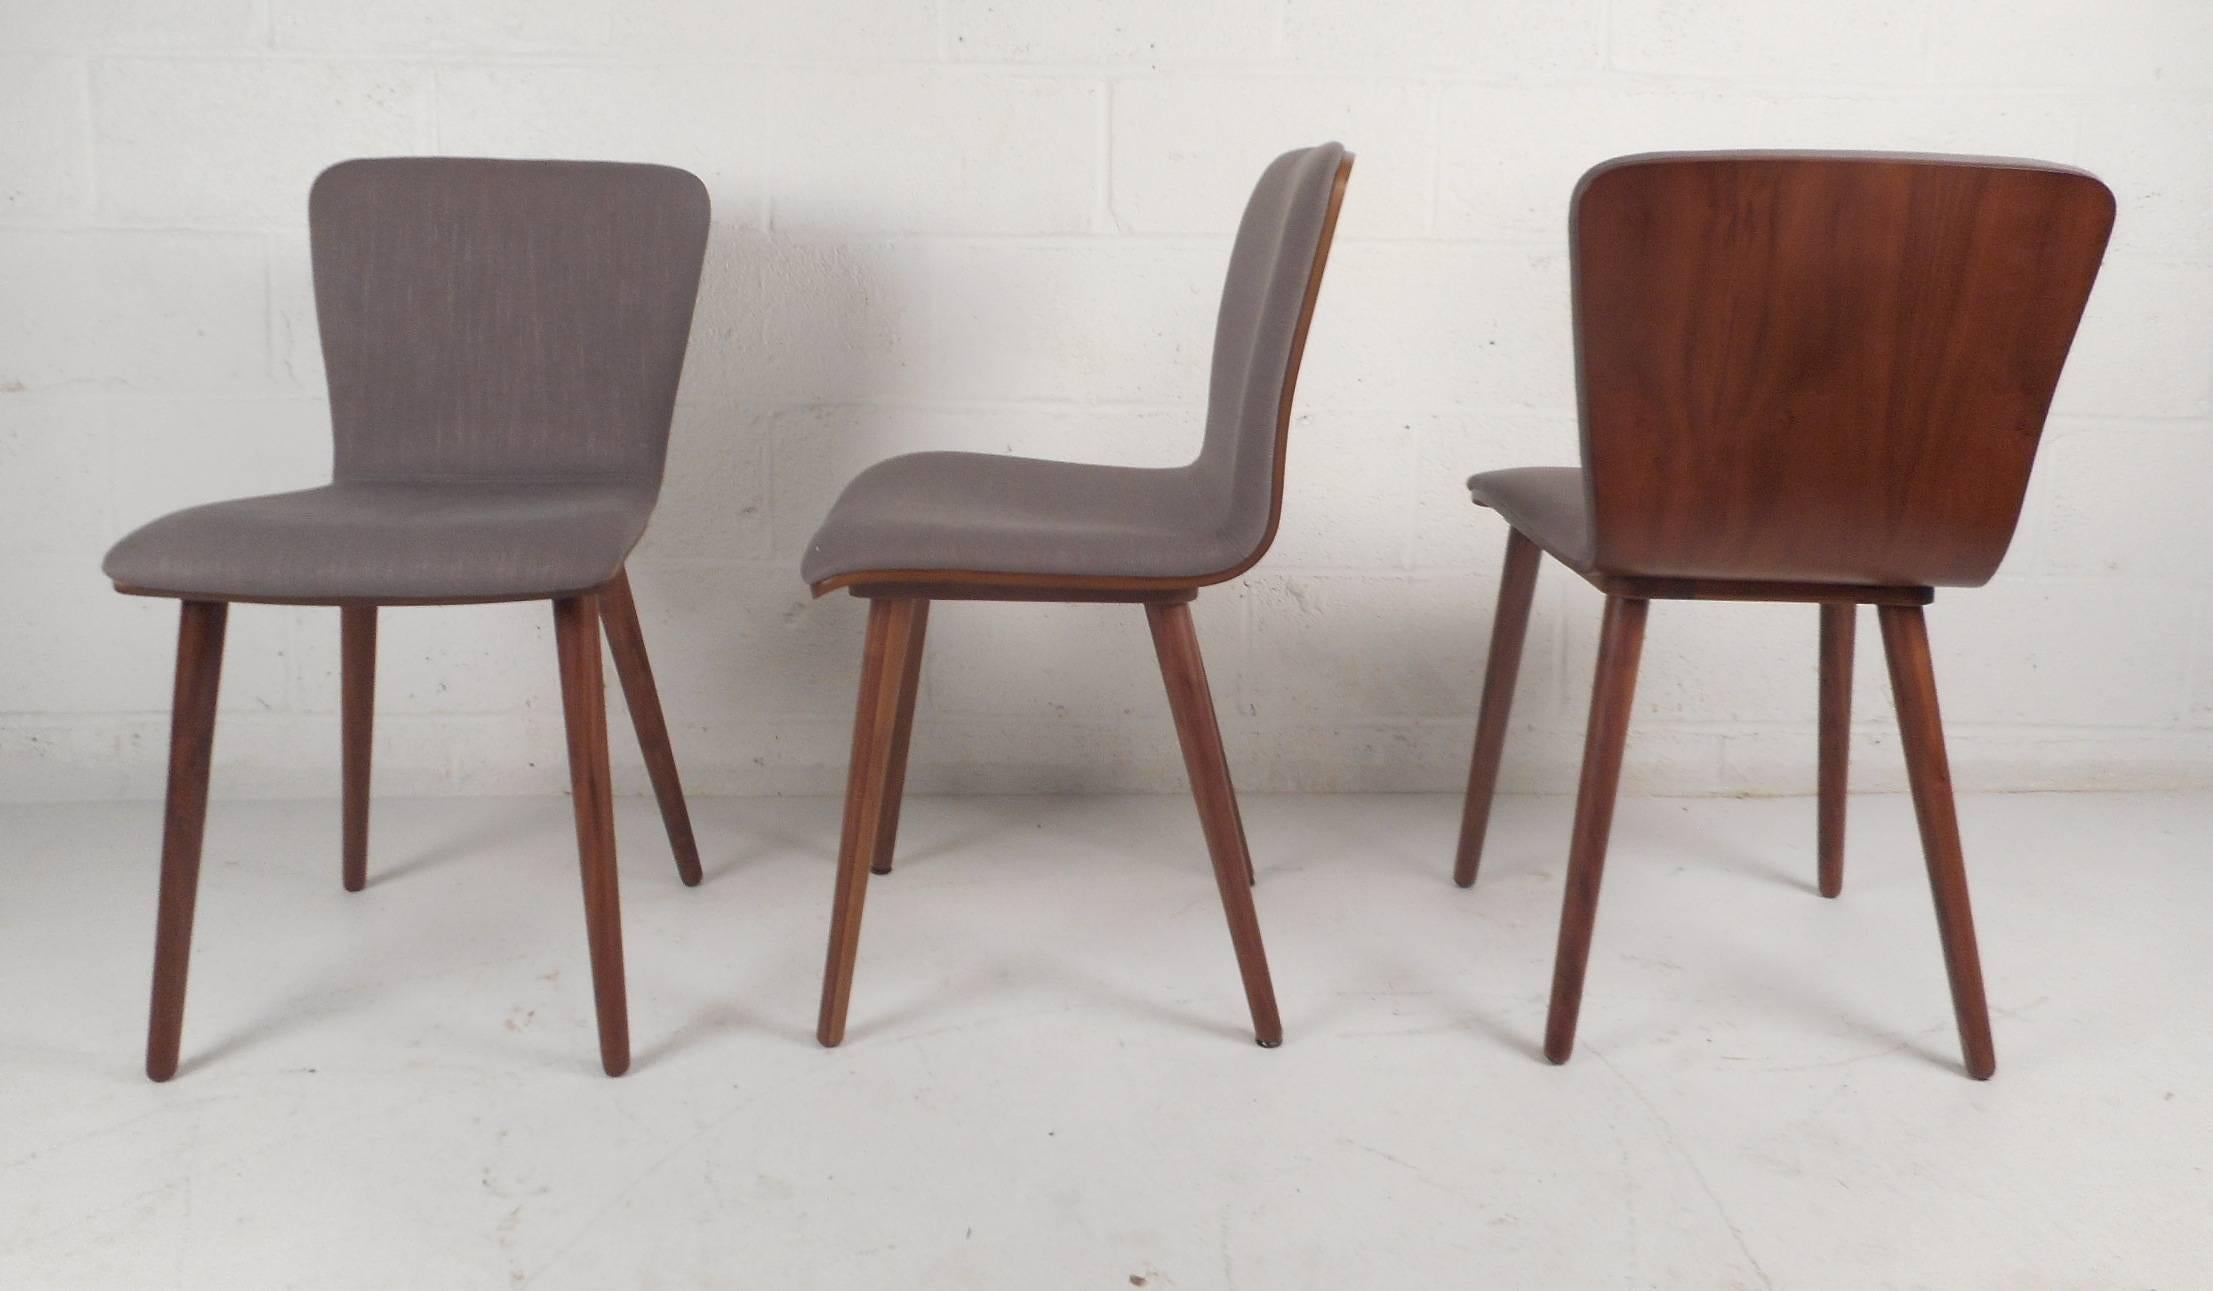 This stunning set of six Mid-Century Modern style dining chairs feature upholstered seating with a wood backing. Stylish two-tone slipper design perfectly contours to the body ensuring maximum comfort. Unique chairs with beautiful wood grain and